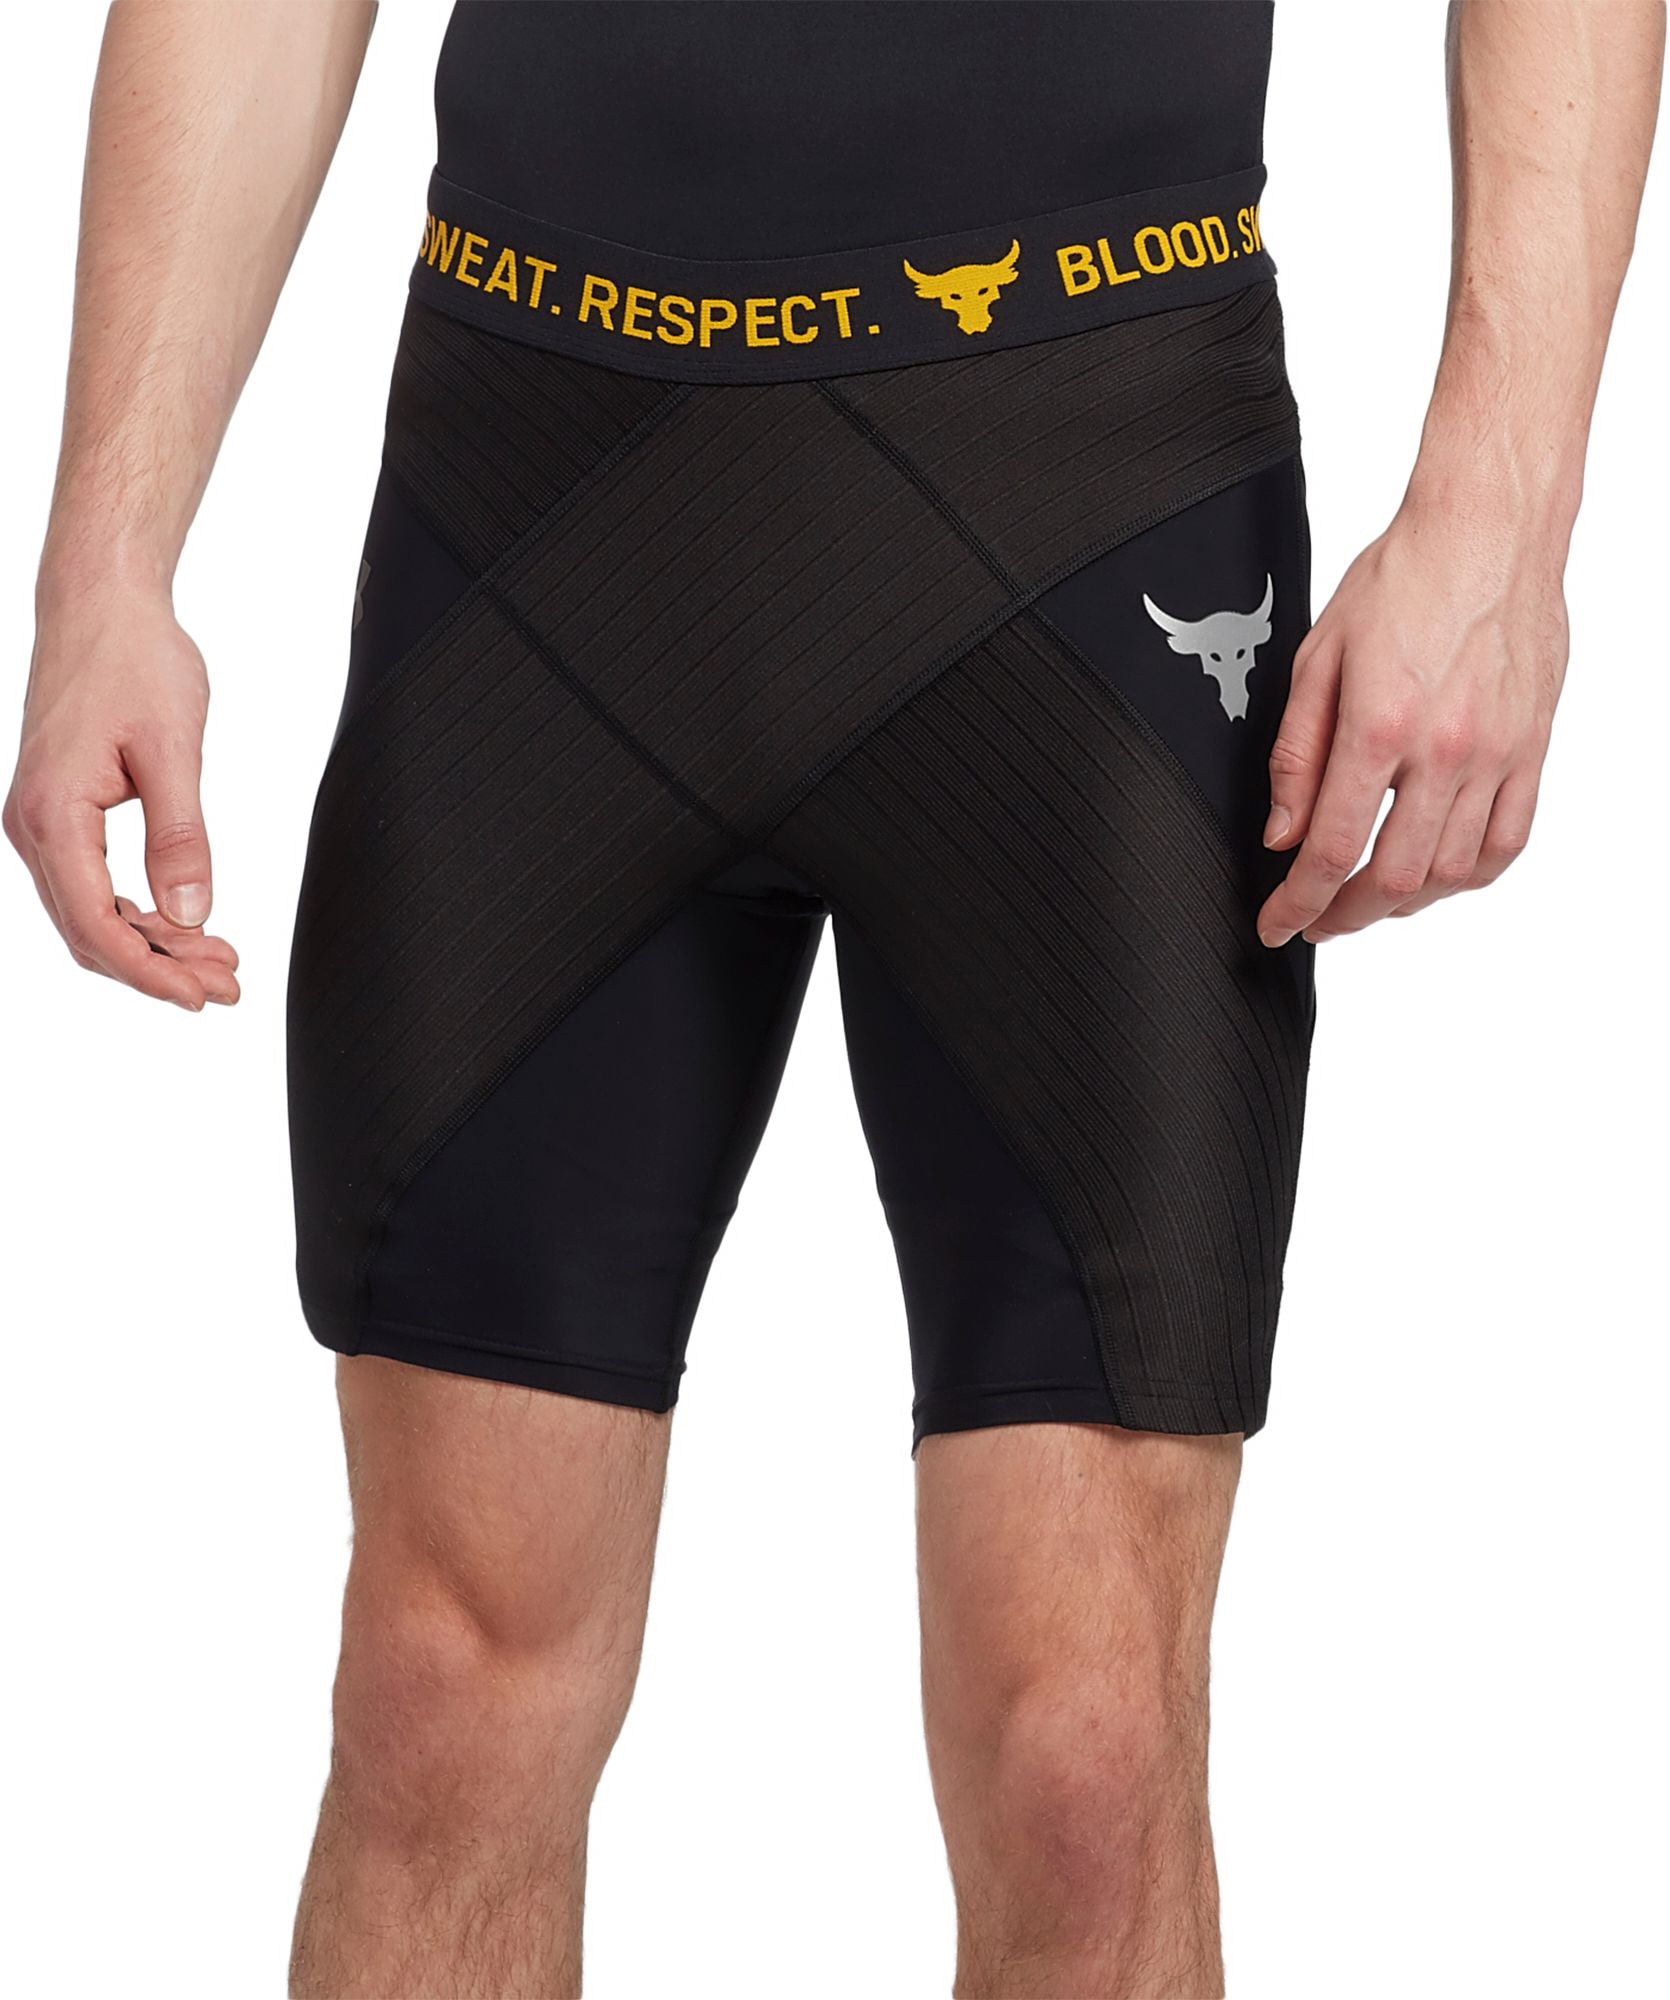 Under Armour Mens CoolSwitch Compression Shorts Under Armour Apparel 1271333 